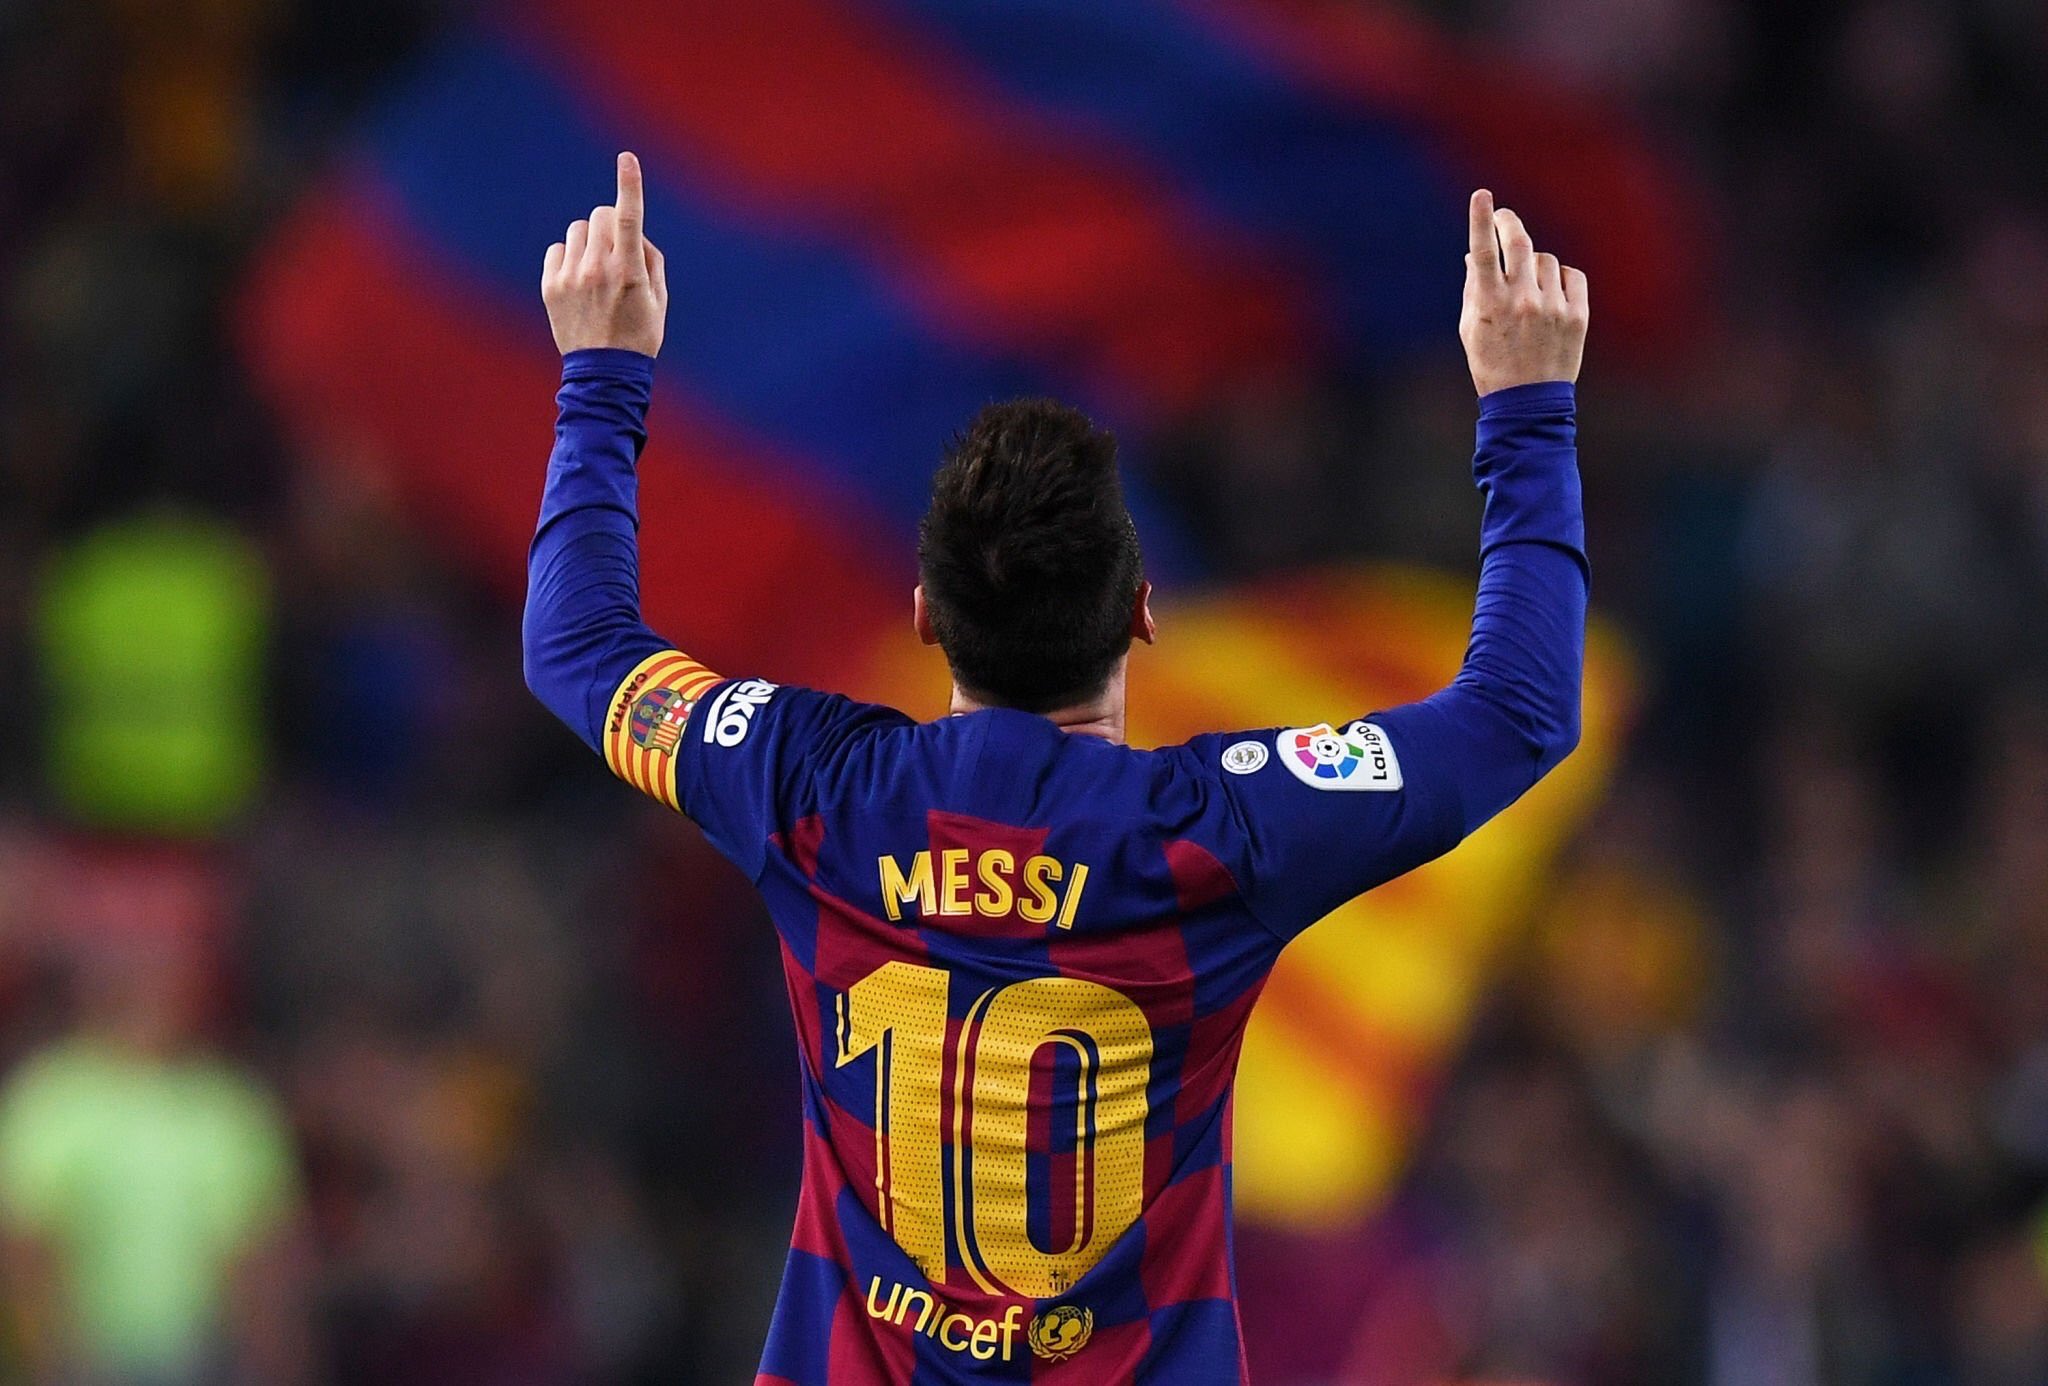 Messi overtakes Ronaldo goal scoring record in 118 fewer matches